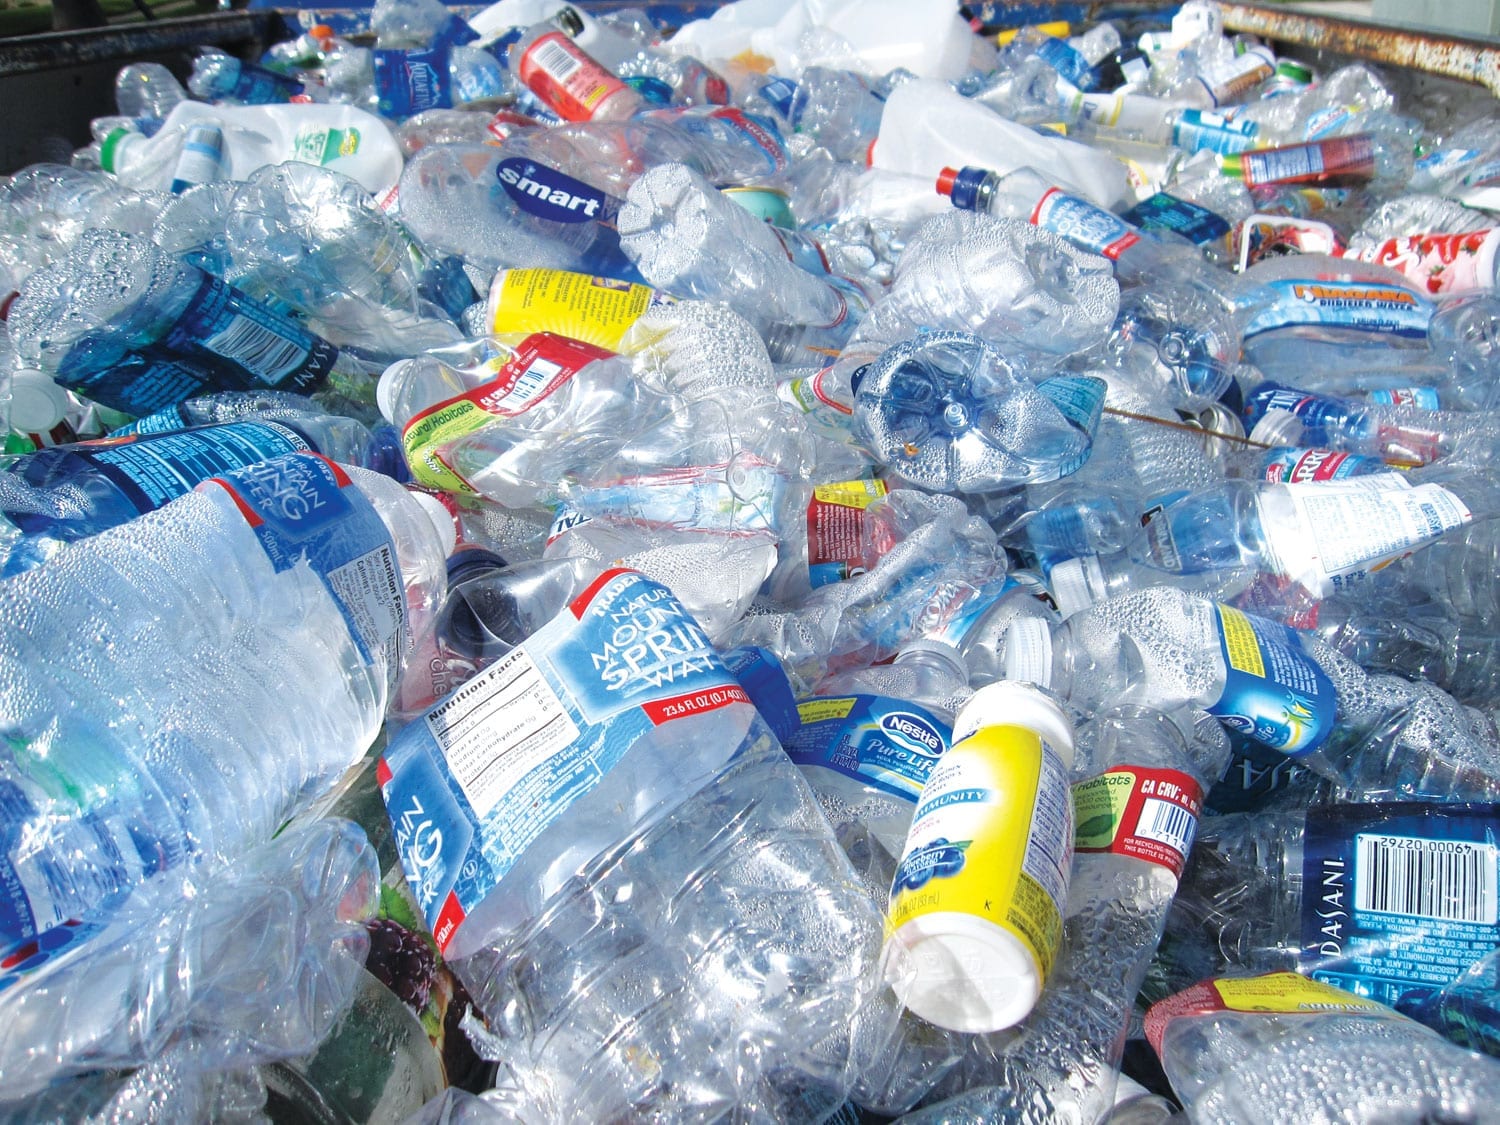 Chemists find new way to recycle plastic waste into fuel